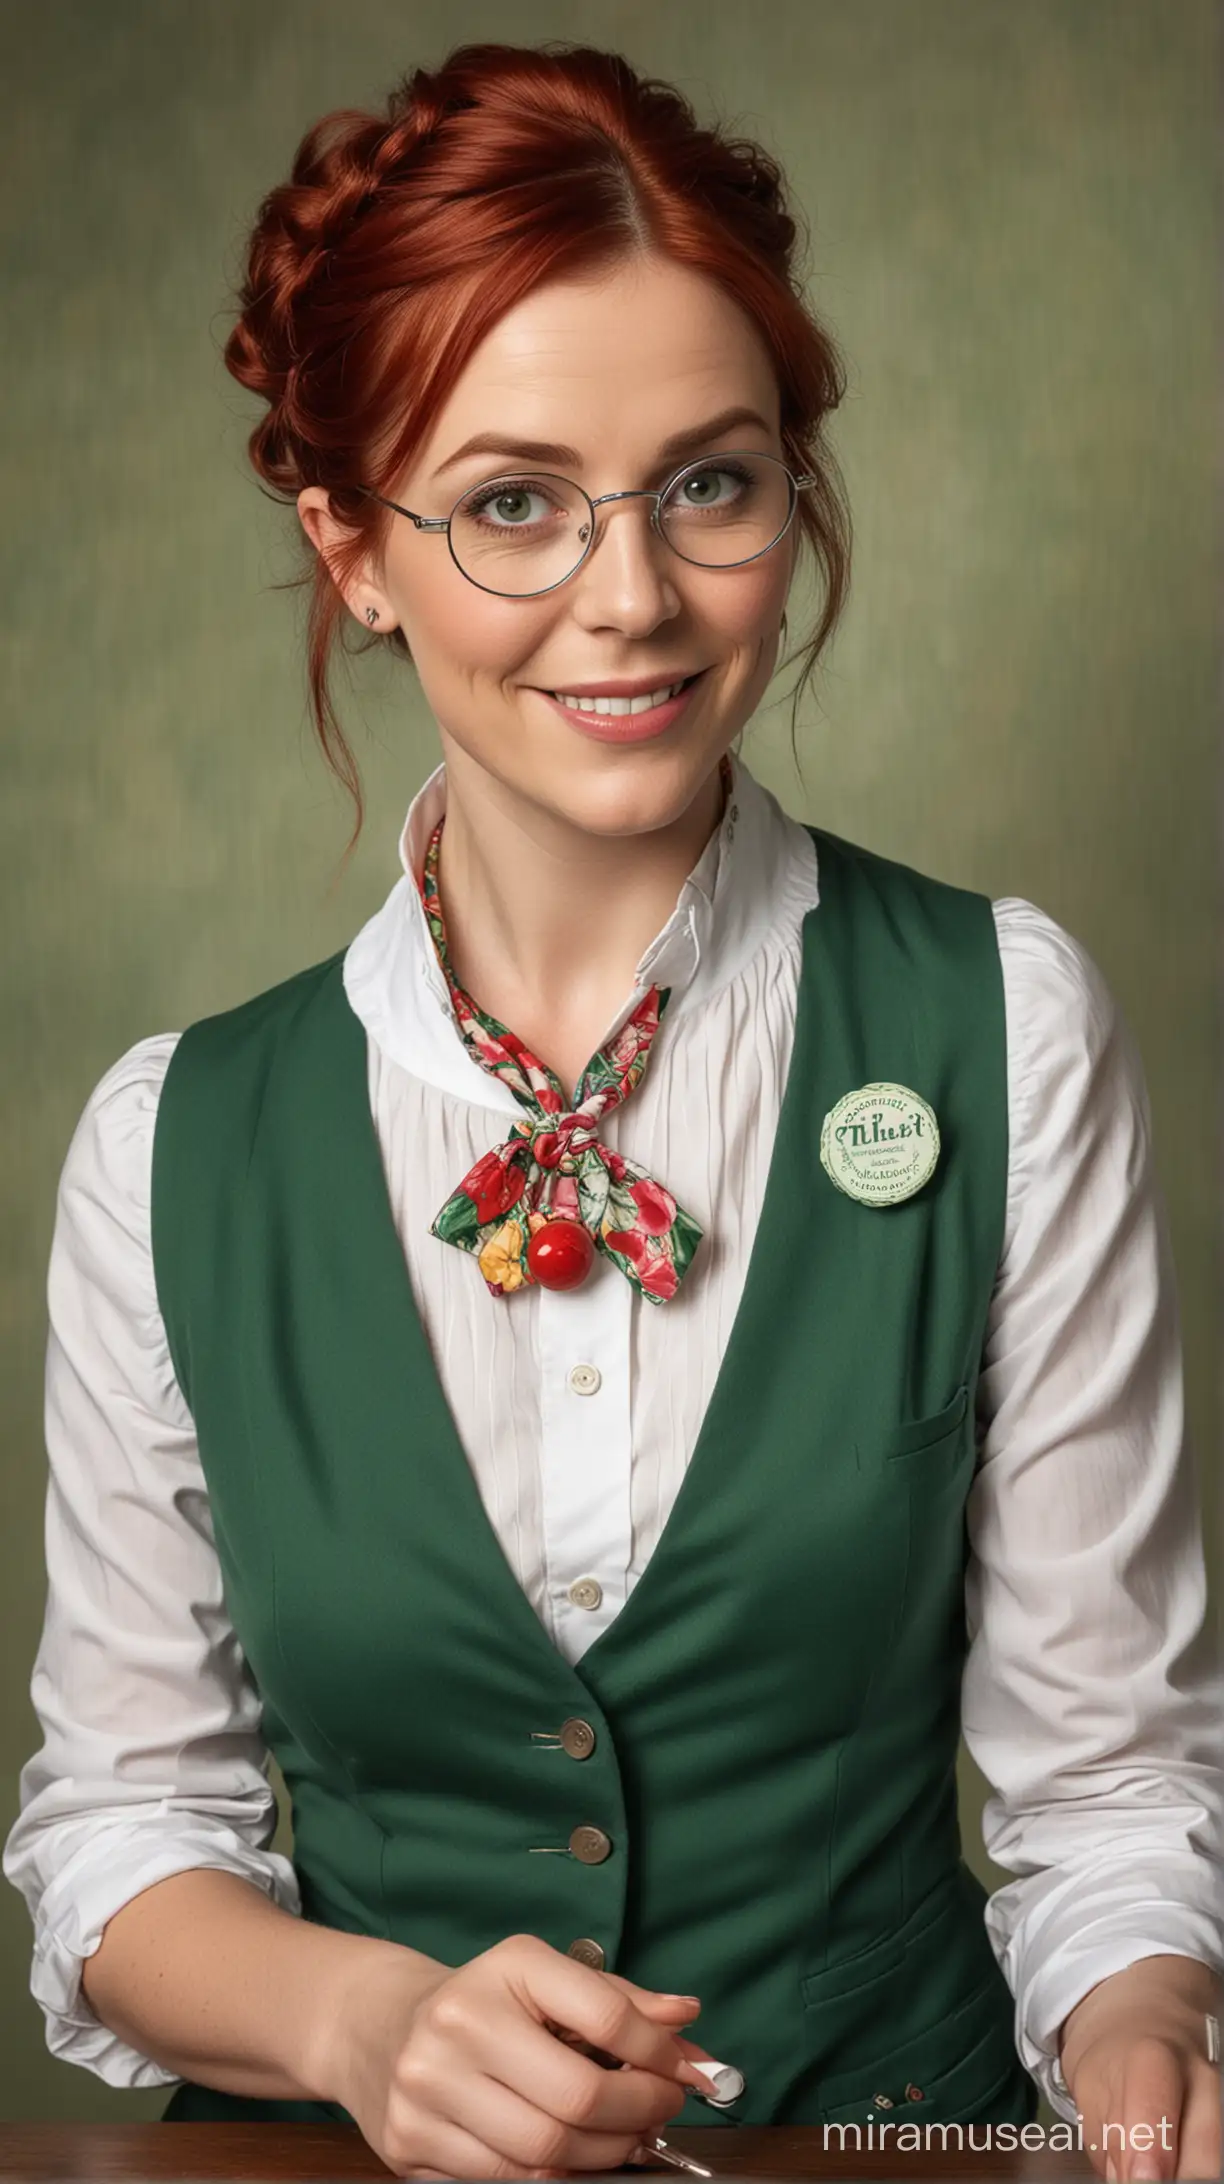 The setting is 1890s. An Irish woman in her late 40s with a short face and is smirking. She has red hair in a braid and wears silver circular spectacles. She is dressed in a white shirt with a green waist coat that has a floral pattern on it. She is in the middle of signing "hello" in British Sign Language. Beside her on a table is a bottle of gin and a doctors bag. Poking out of her waist coat pocket are circular lollipop candies. Any medicinal or botanical paraphernalia may be in the scene.